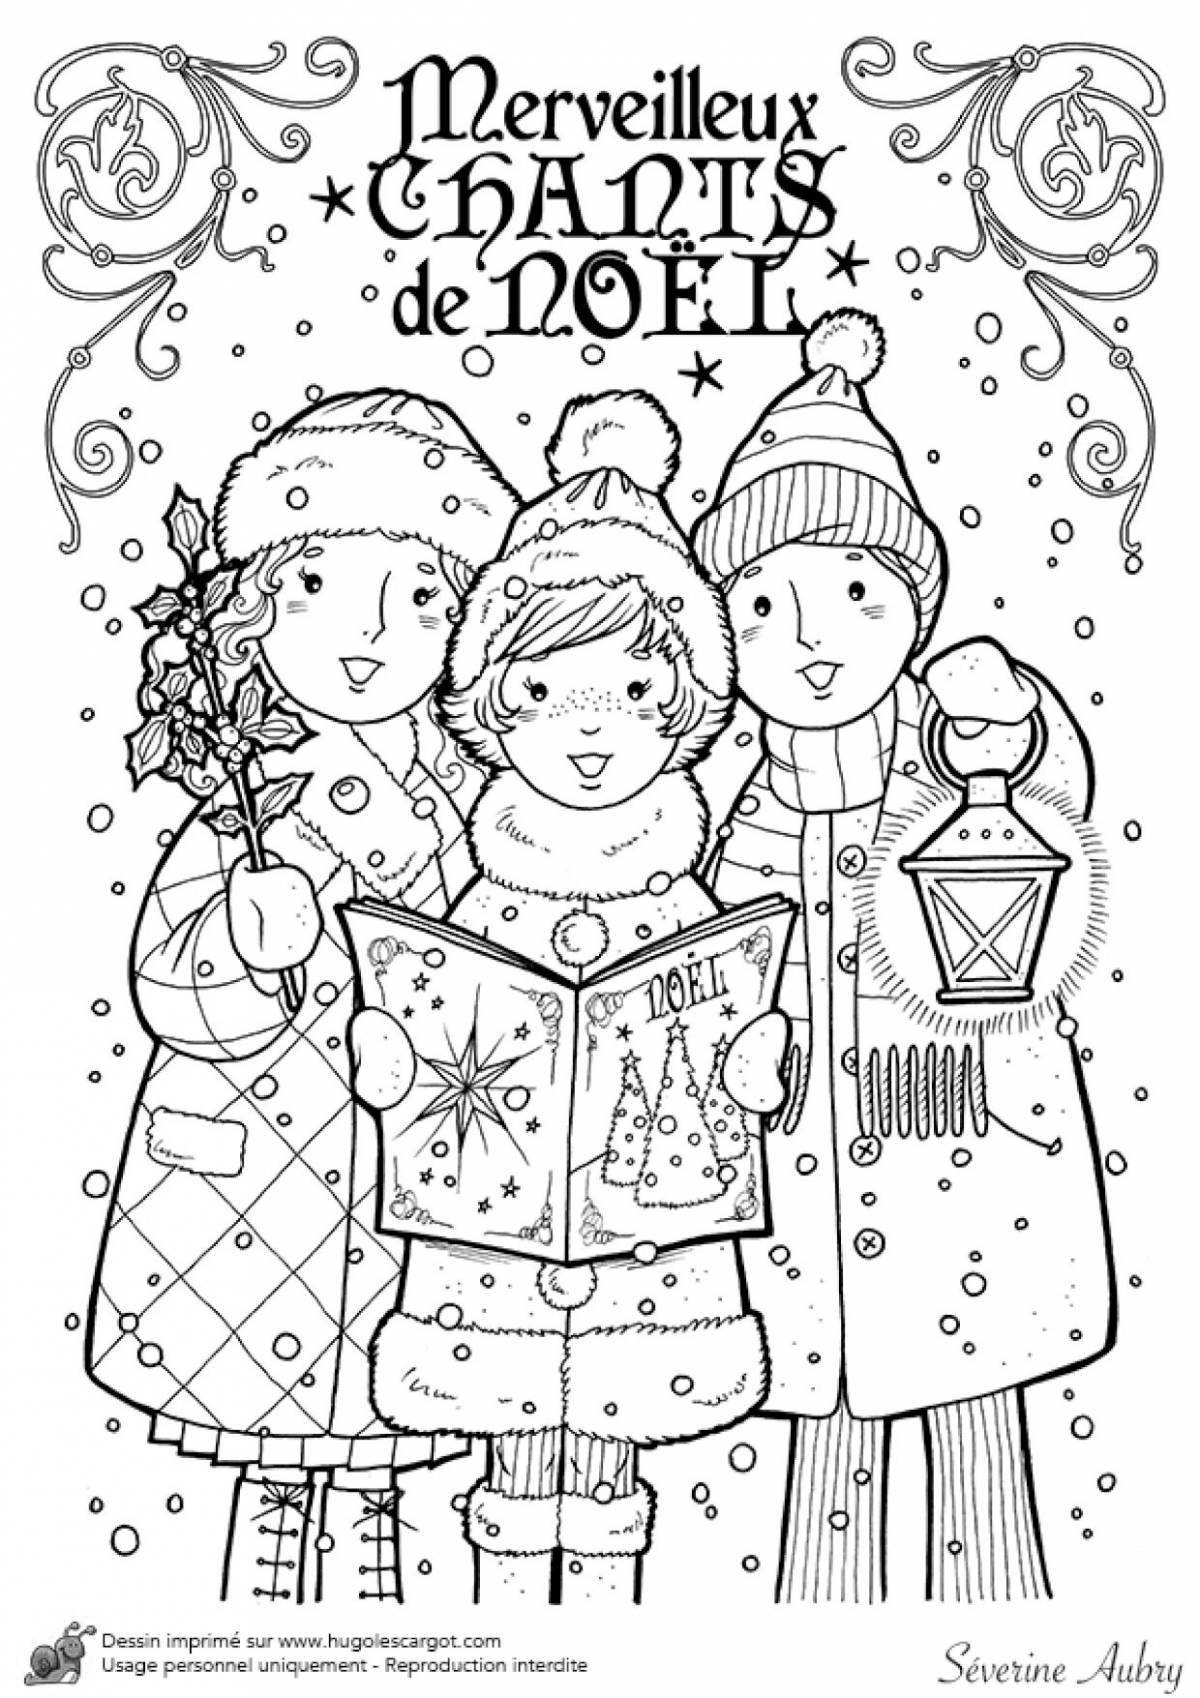 Crazy carol coloring pages for 4-5 year olds